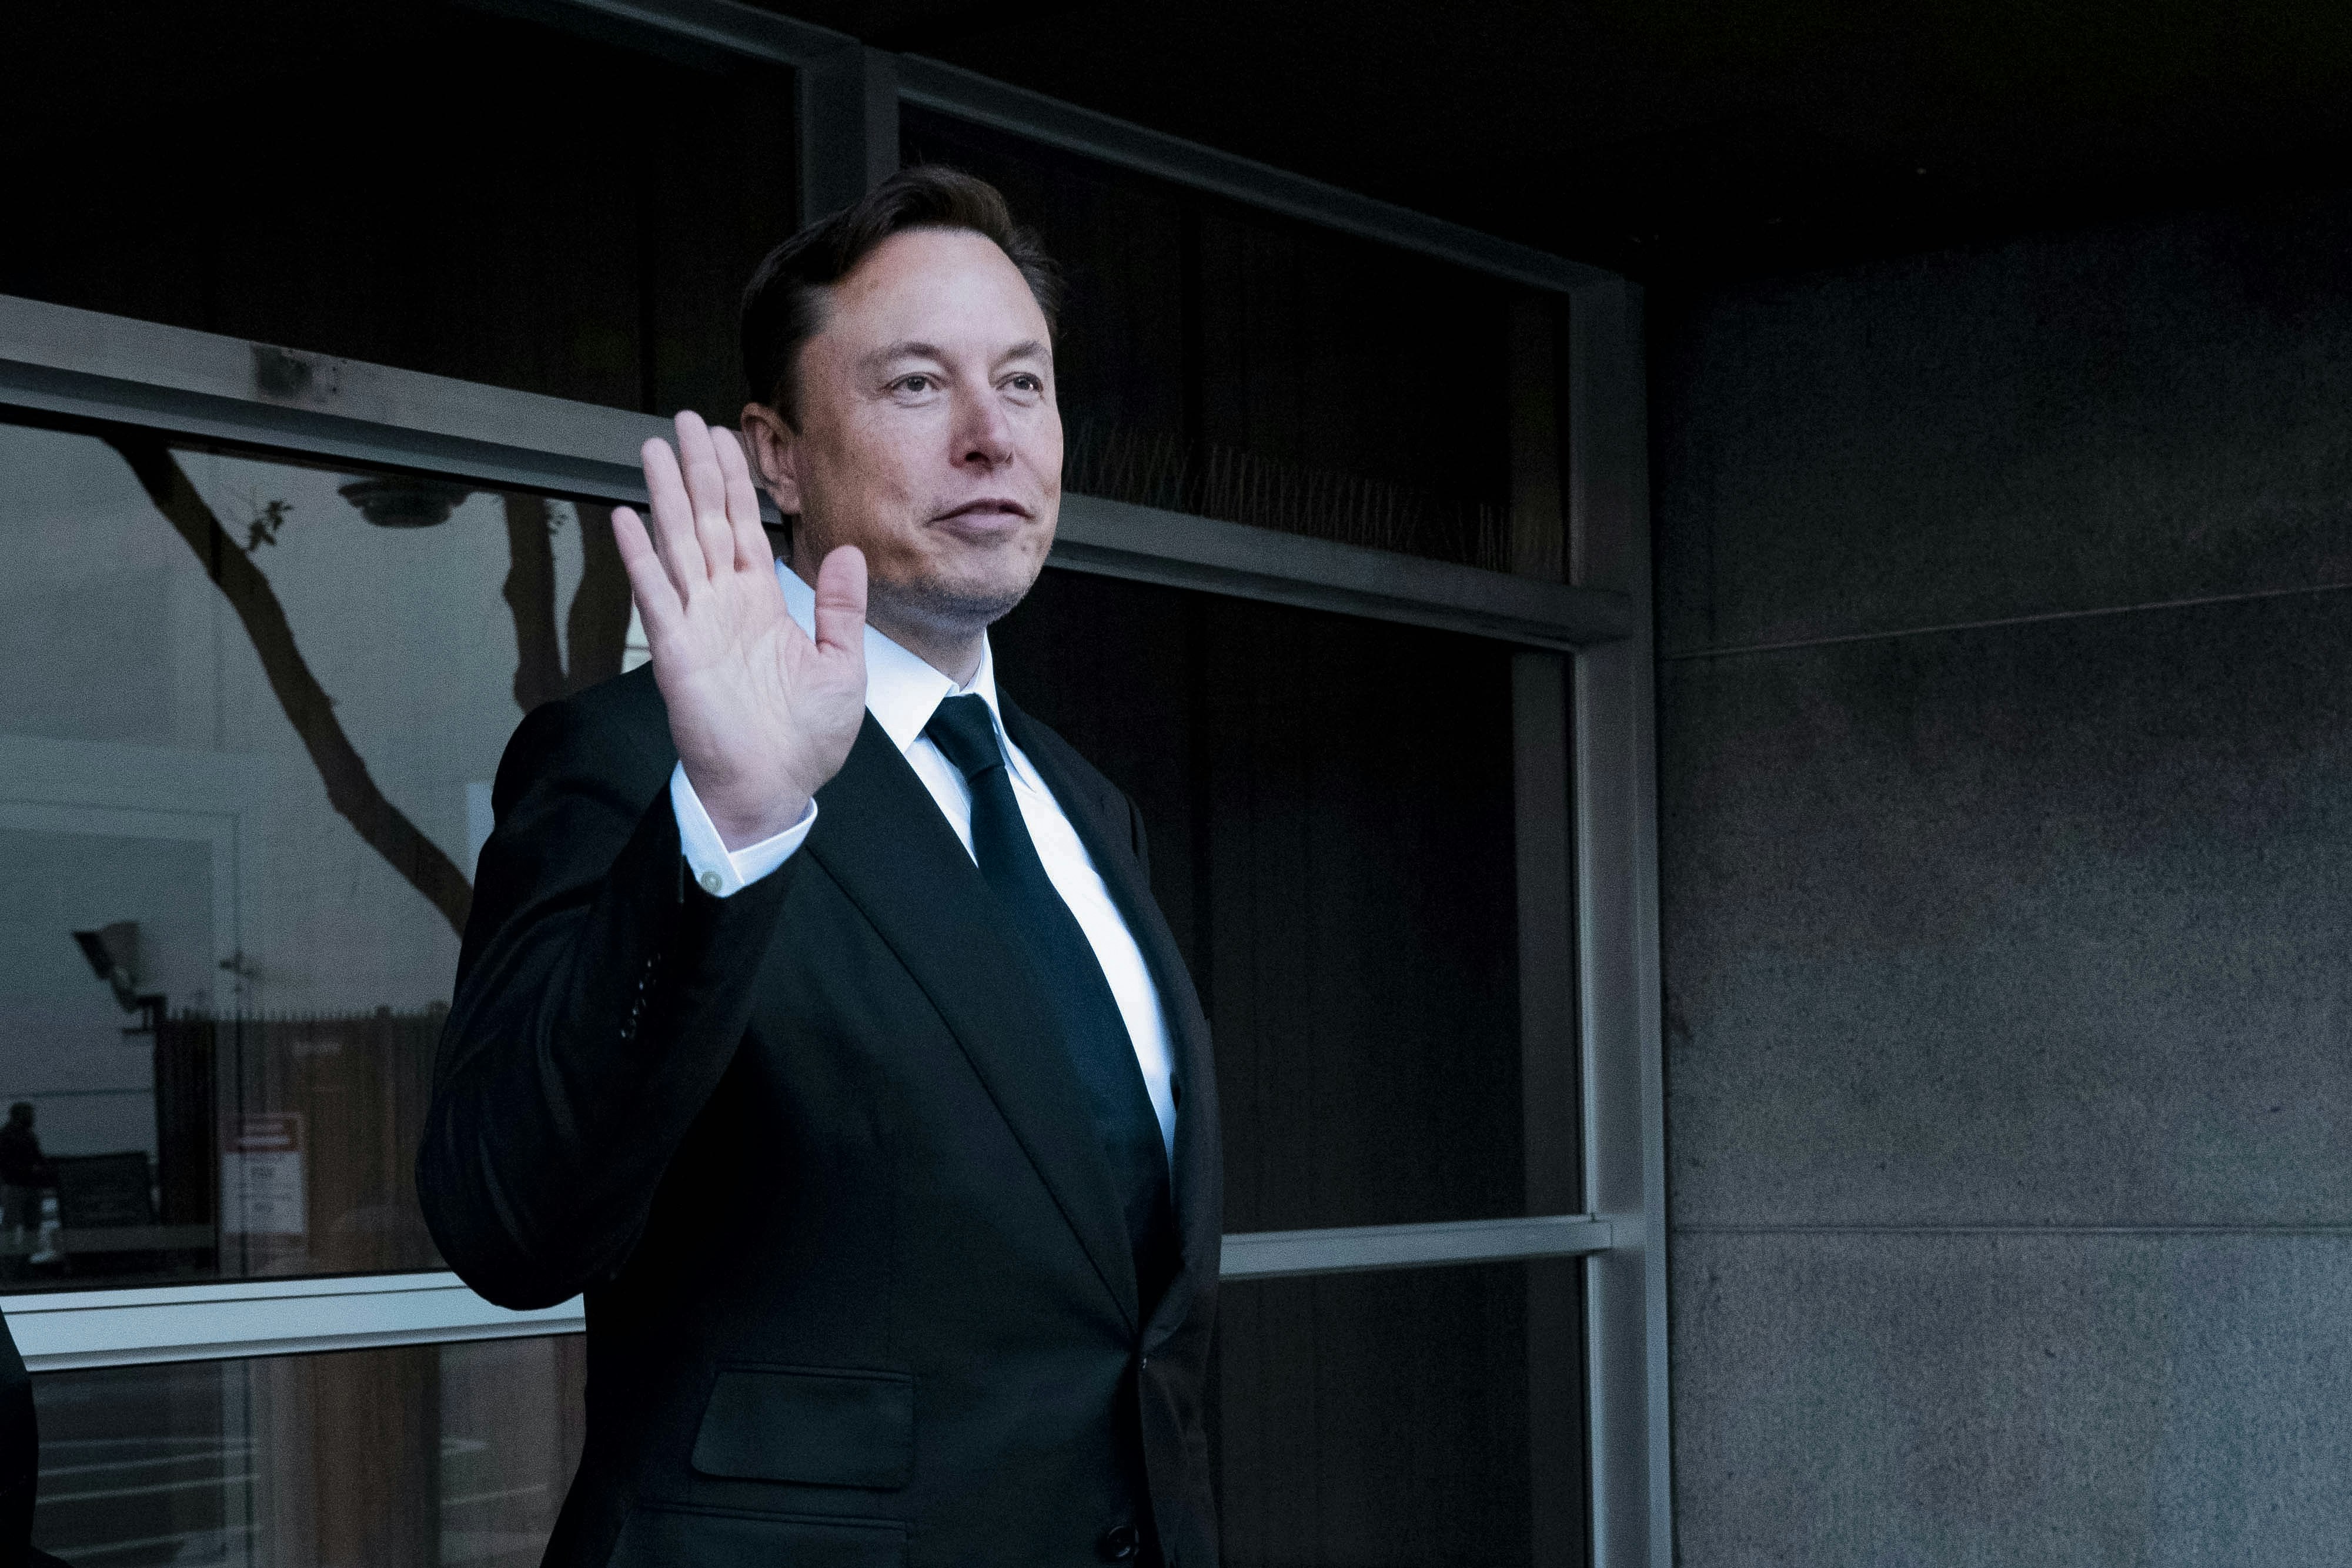 Elon Musk, chief executive officer of Tesla Inc., departs court in San Francisco, California, US, on Tuesday, Jan. 24, 2023. Investors suing Tesla and Musk argue that his August 2018 tweets about taking Tesla private with funding secured were indisputably false and cost them billions of dollars by spurring wild swings in Tesla's stock price. Photographer: Marlena Sloss/Bloomberg via Getty Images